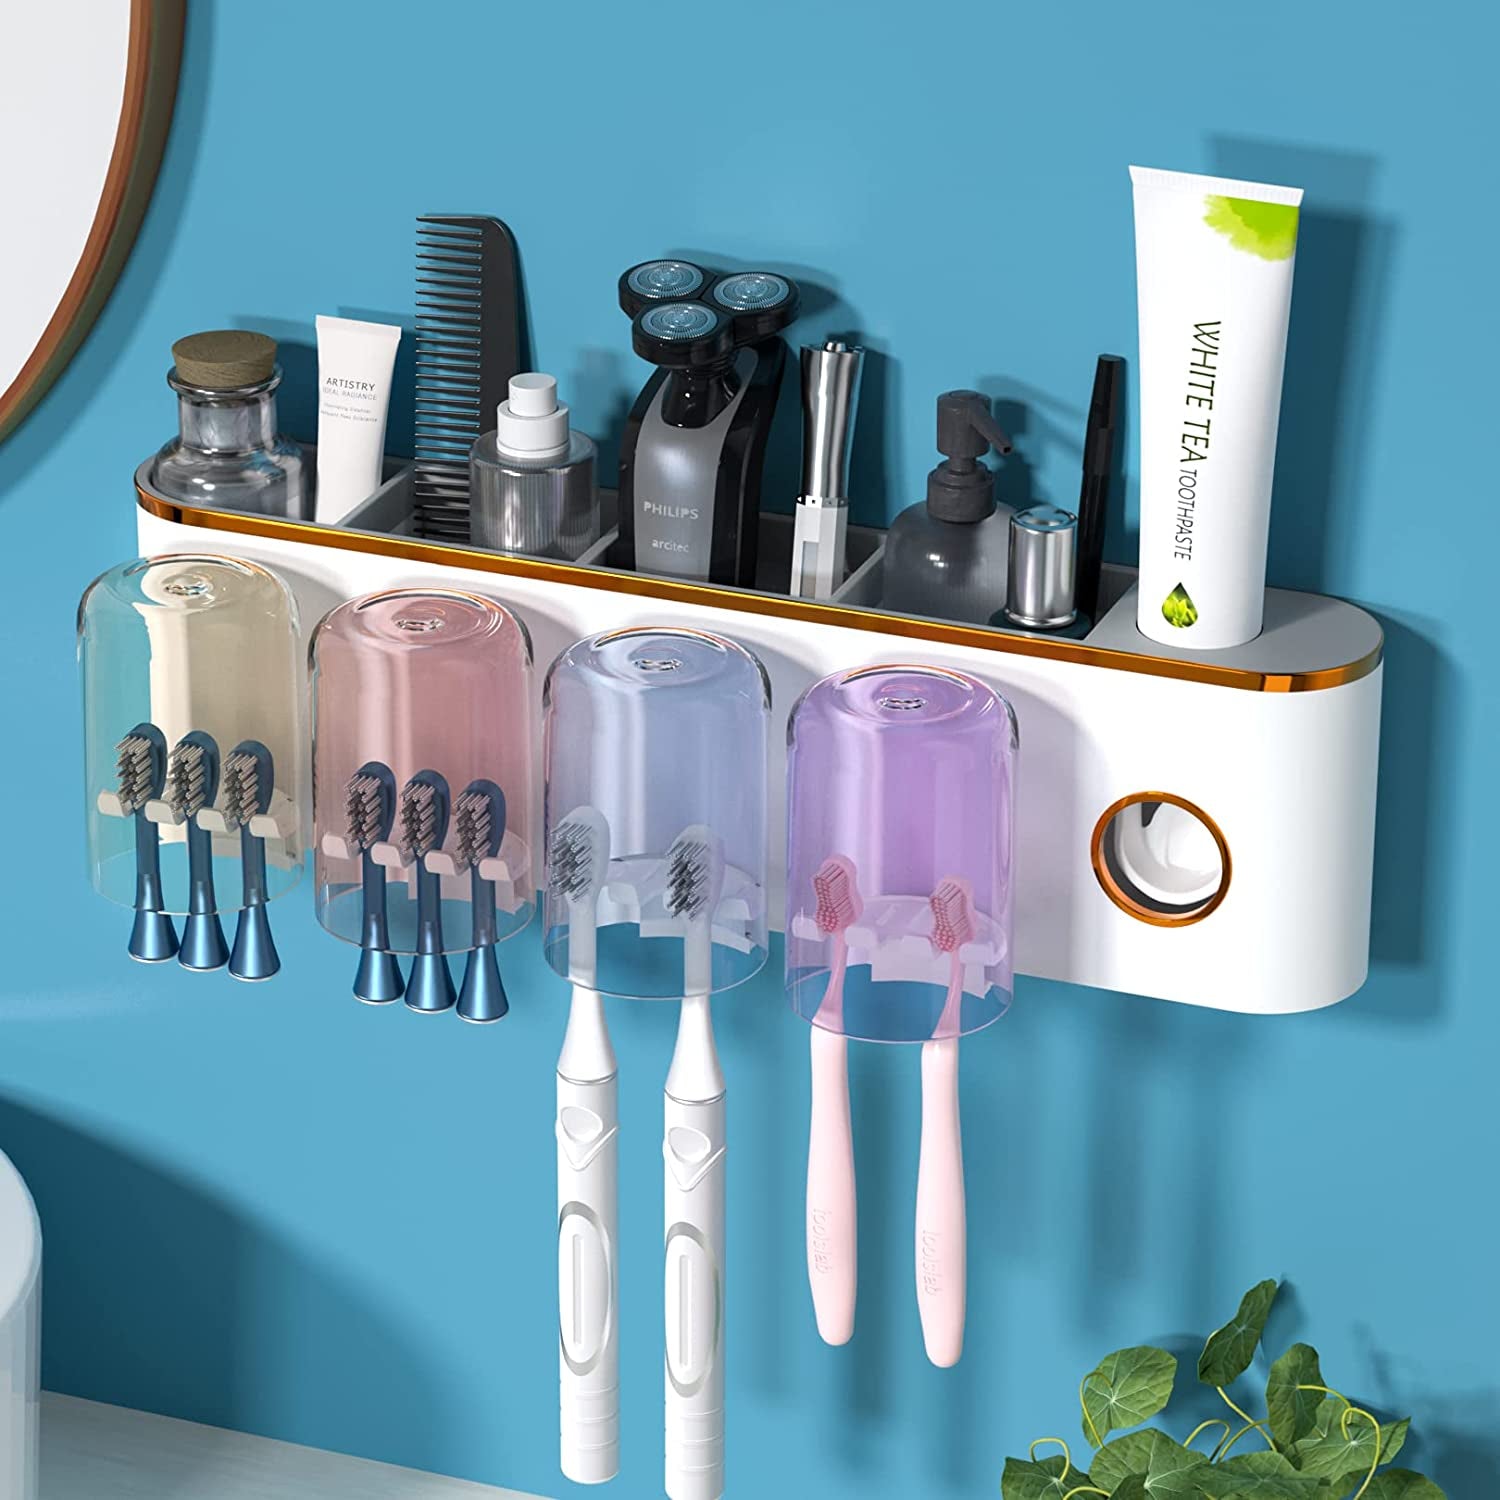 Wall Mounted Automatic Toothpaste Dispenser with Dust-Proof Cover and 2 Toothpaste Squeezer, 2 Electric Toothbrush Holders and 4 Toothbrush Organizer Slots